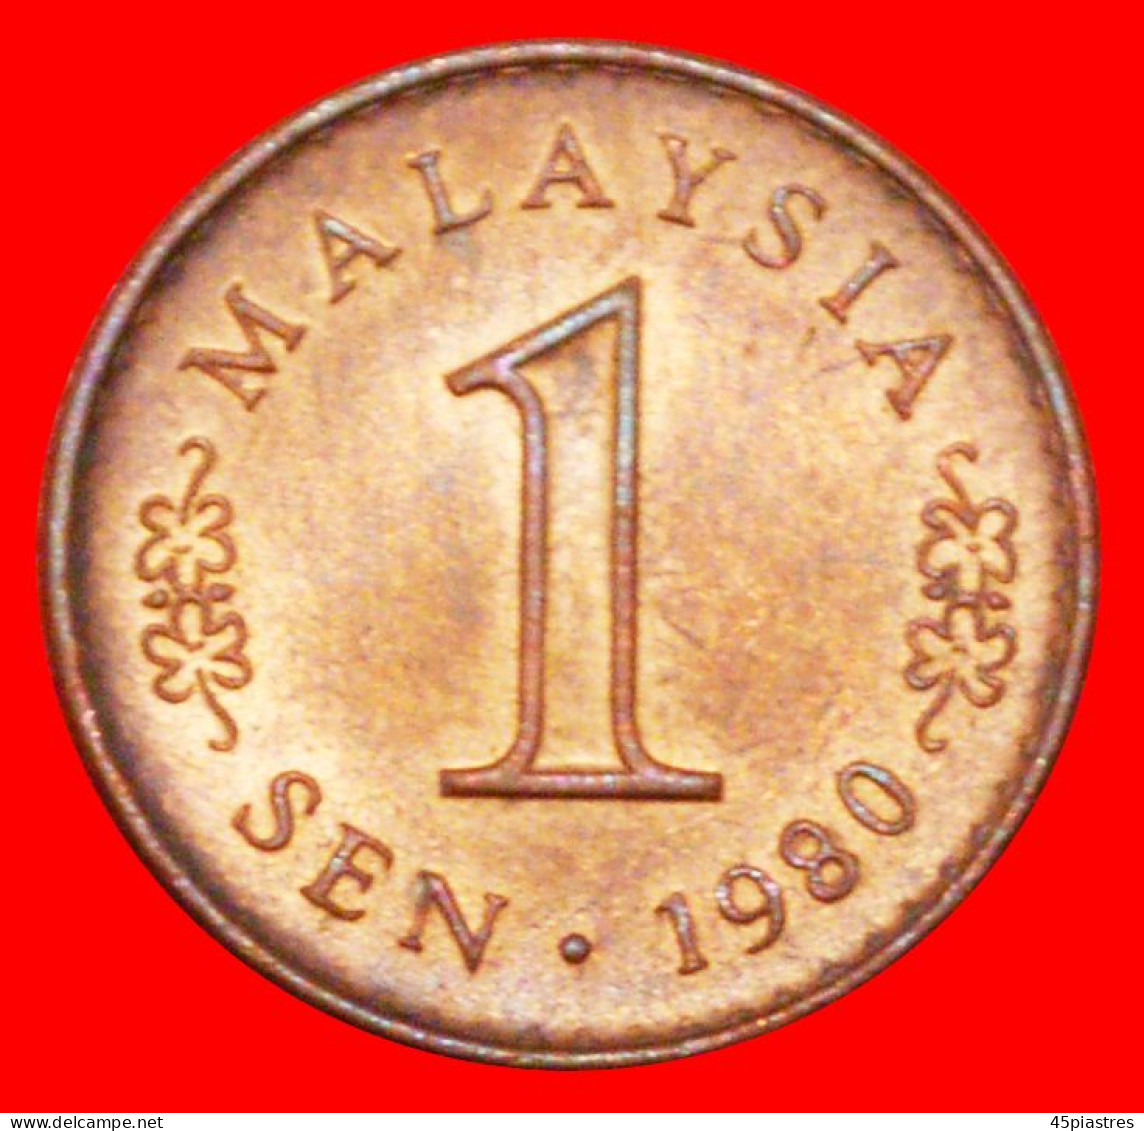 * MOON AND STAR ERROR  NOT BRONZE (1967-1988): MALAYSIA  1 SEN 1980 UNC MINT LUSTRE! · LOW START ·  NO RESERVE! - Malaysia